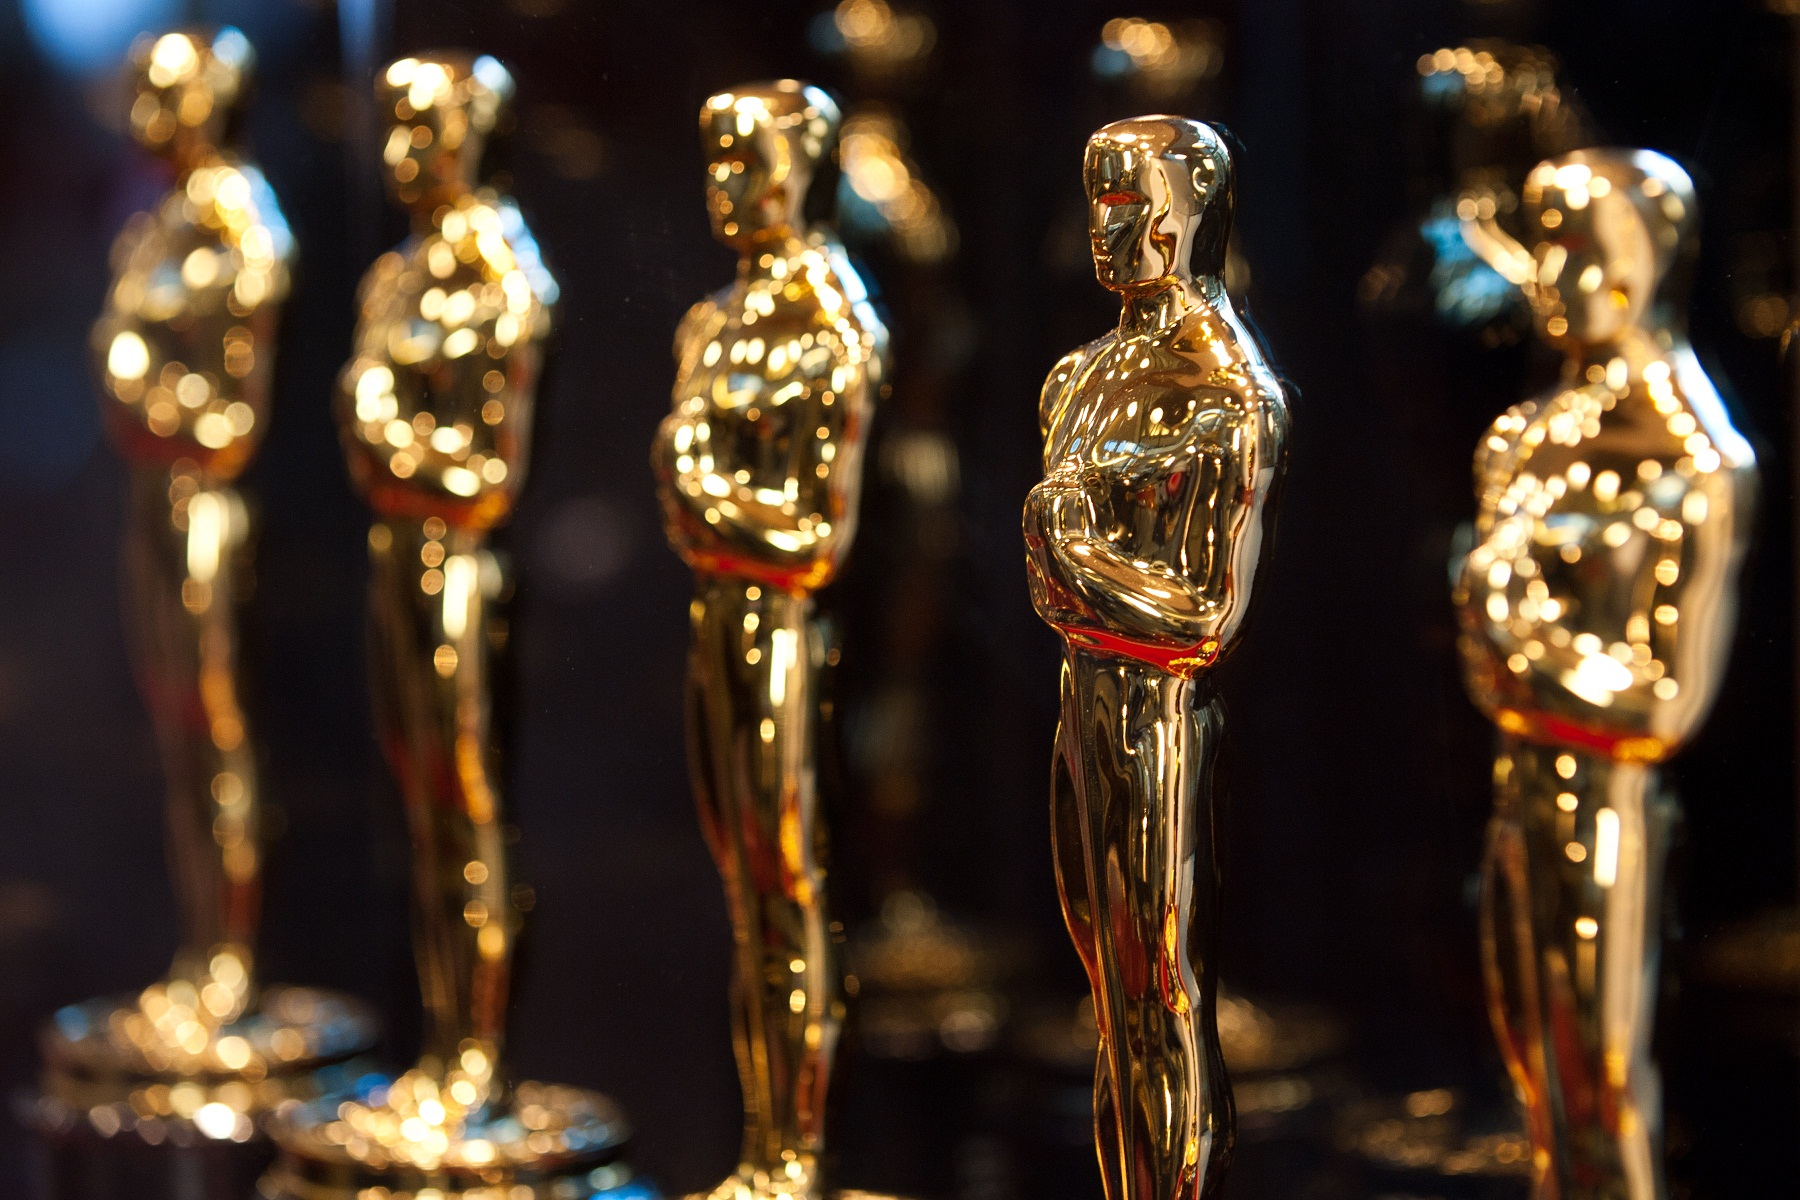 For the first time, Oscar® fans in Chicago will be able to hold an actual Oscar statuette and have their photo taken at the Academy of Motion Picture Arts and Sciences’ “Meet the Oscars, Chicago.” The one-of-a-kind exhibition opened Friday, February 13, at The Shops at North Bridge on Michigan Avenue, and will run through Sunday, February 22, the night of the 81st Academy Awards® presentation. Hours are Monday through Saturday from 10 a.m. to 7 p.m., and Sunday from 11 a.m. to 6 p.m. Admission is free. Chicago is the only city to host a “Meet the Oscars” exhibition this year.